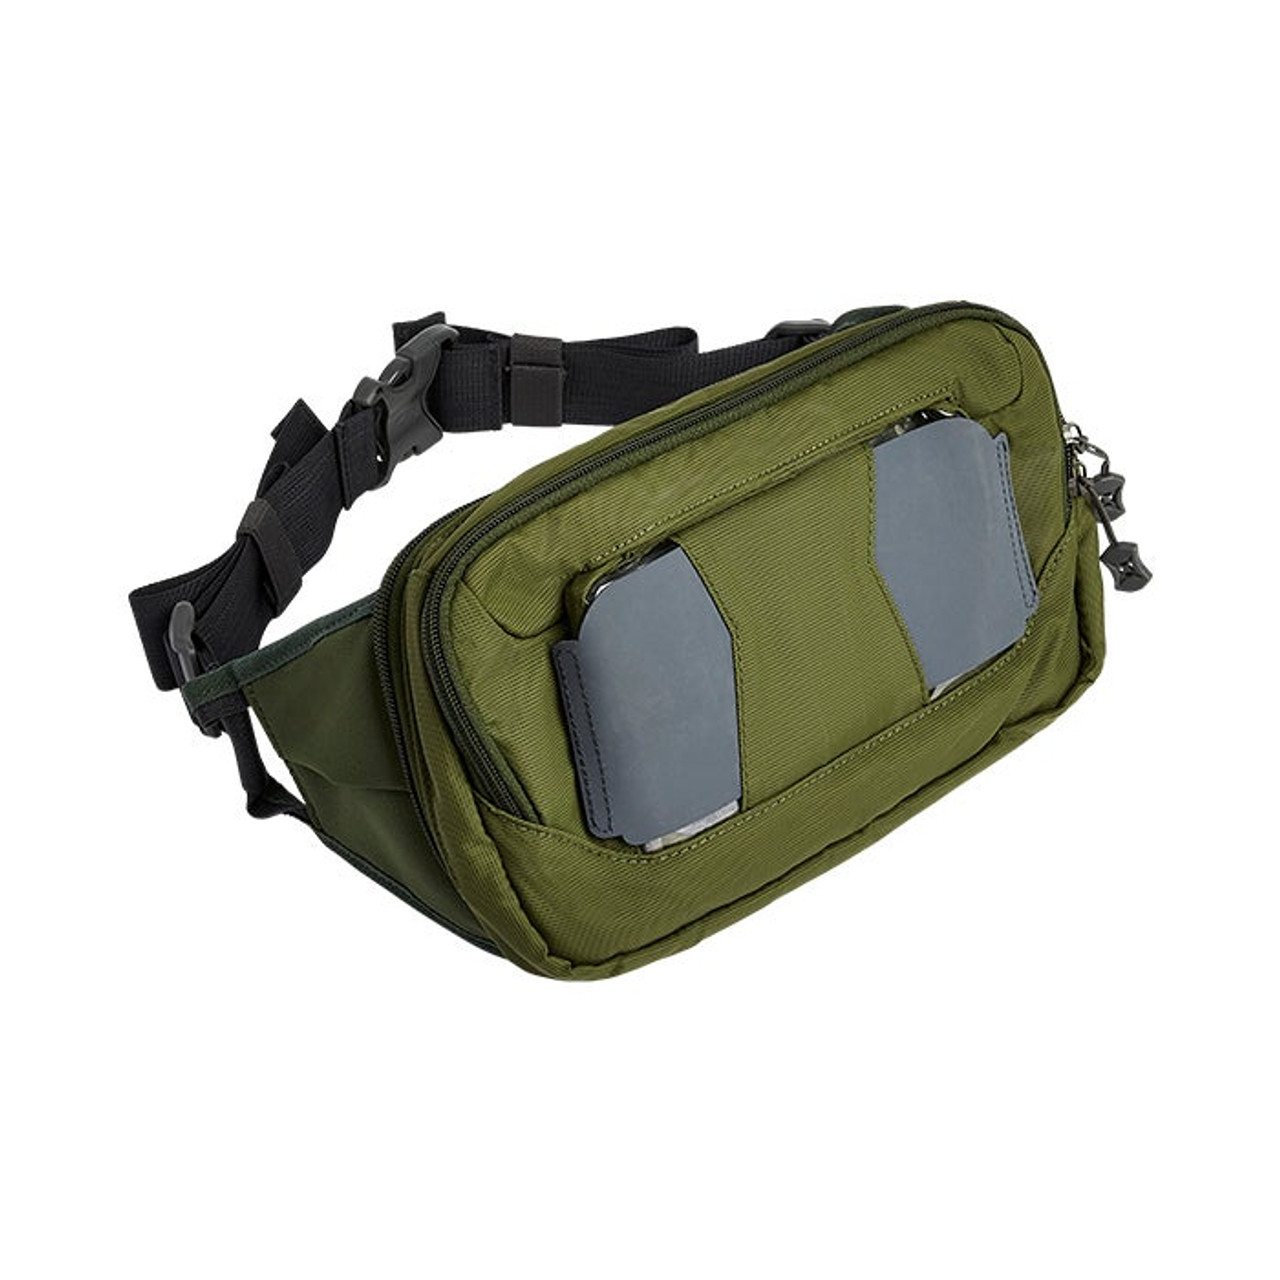 Vertx-SOCP Tactical Fanny Pack-Canopy Green/Smoke Grey - Army Shop